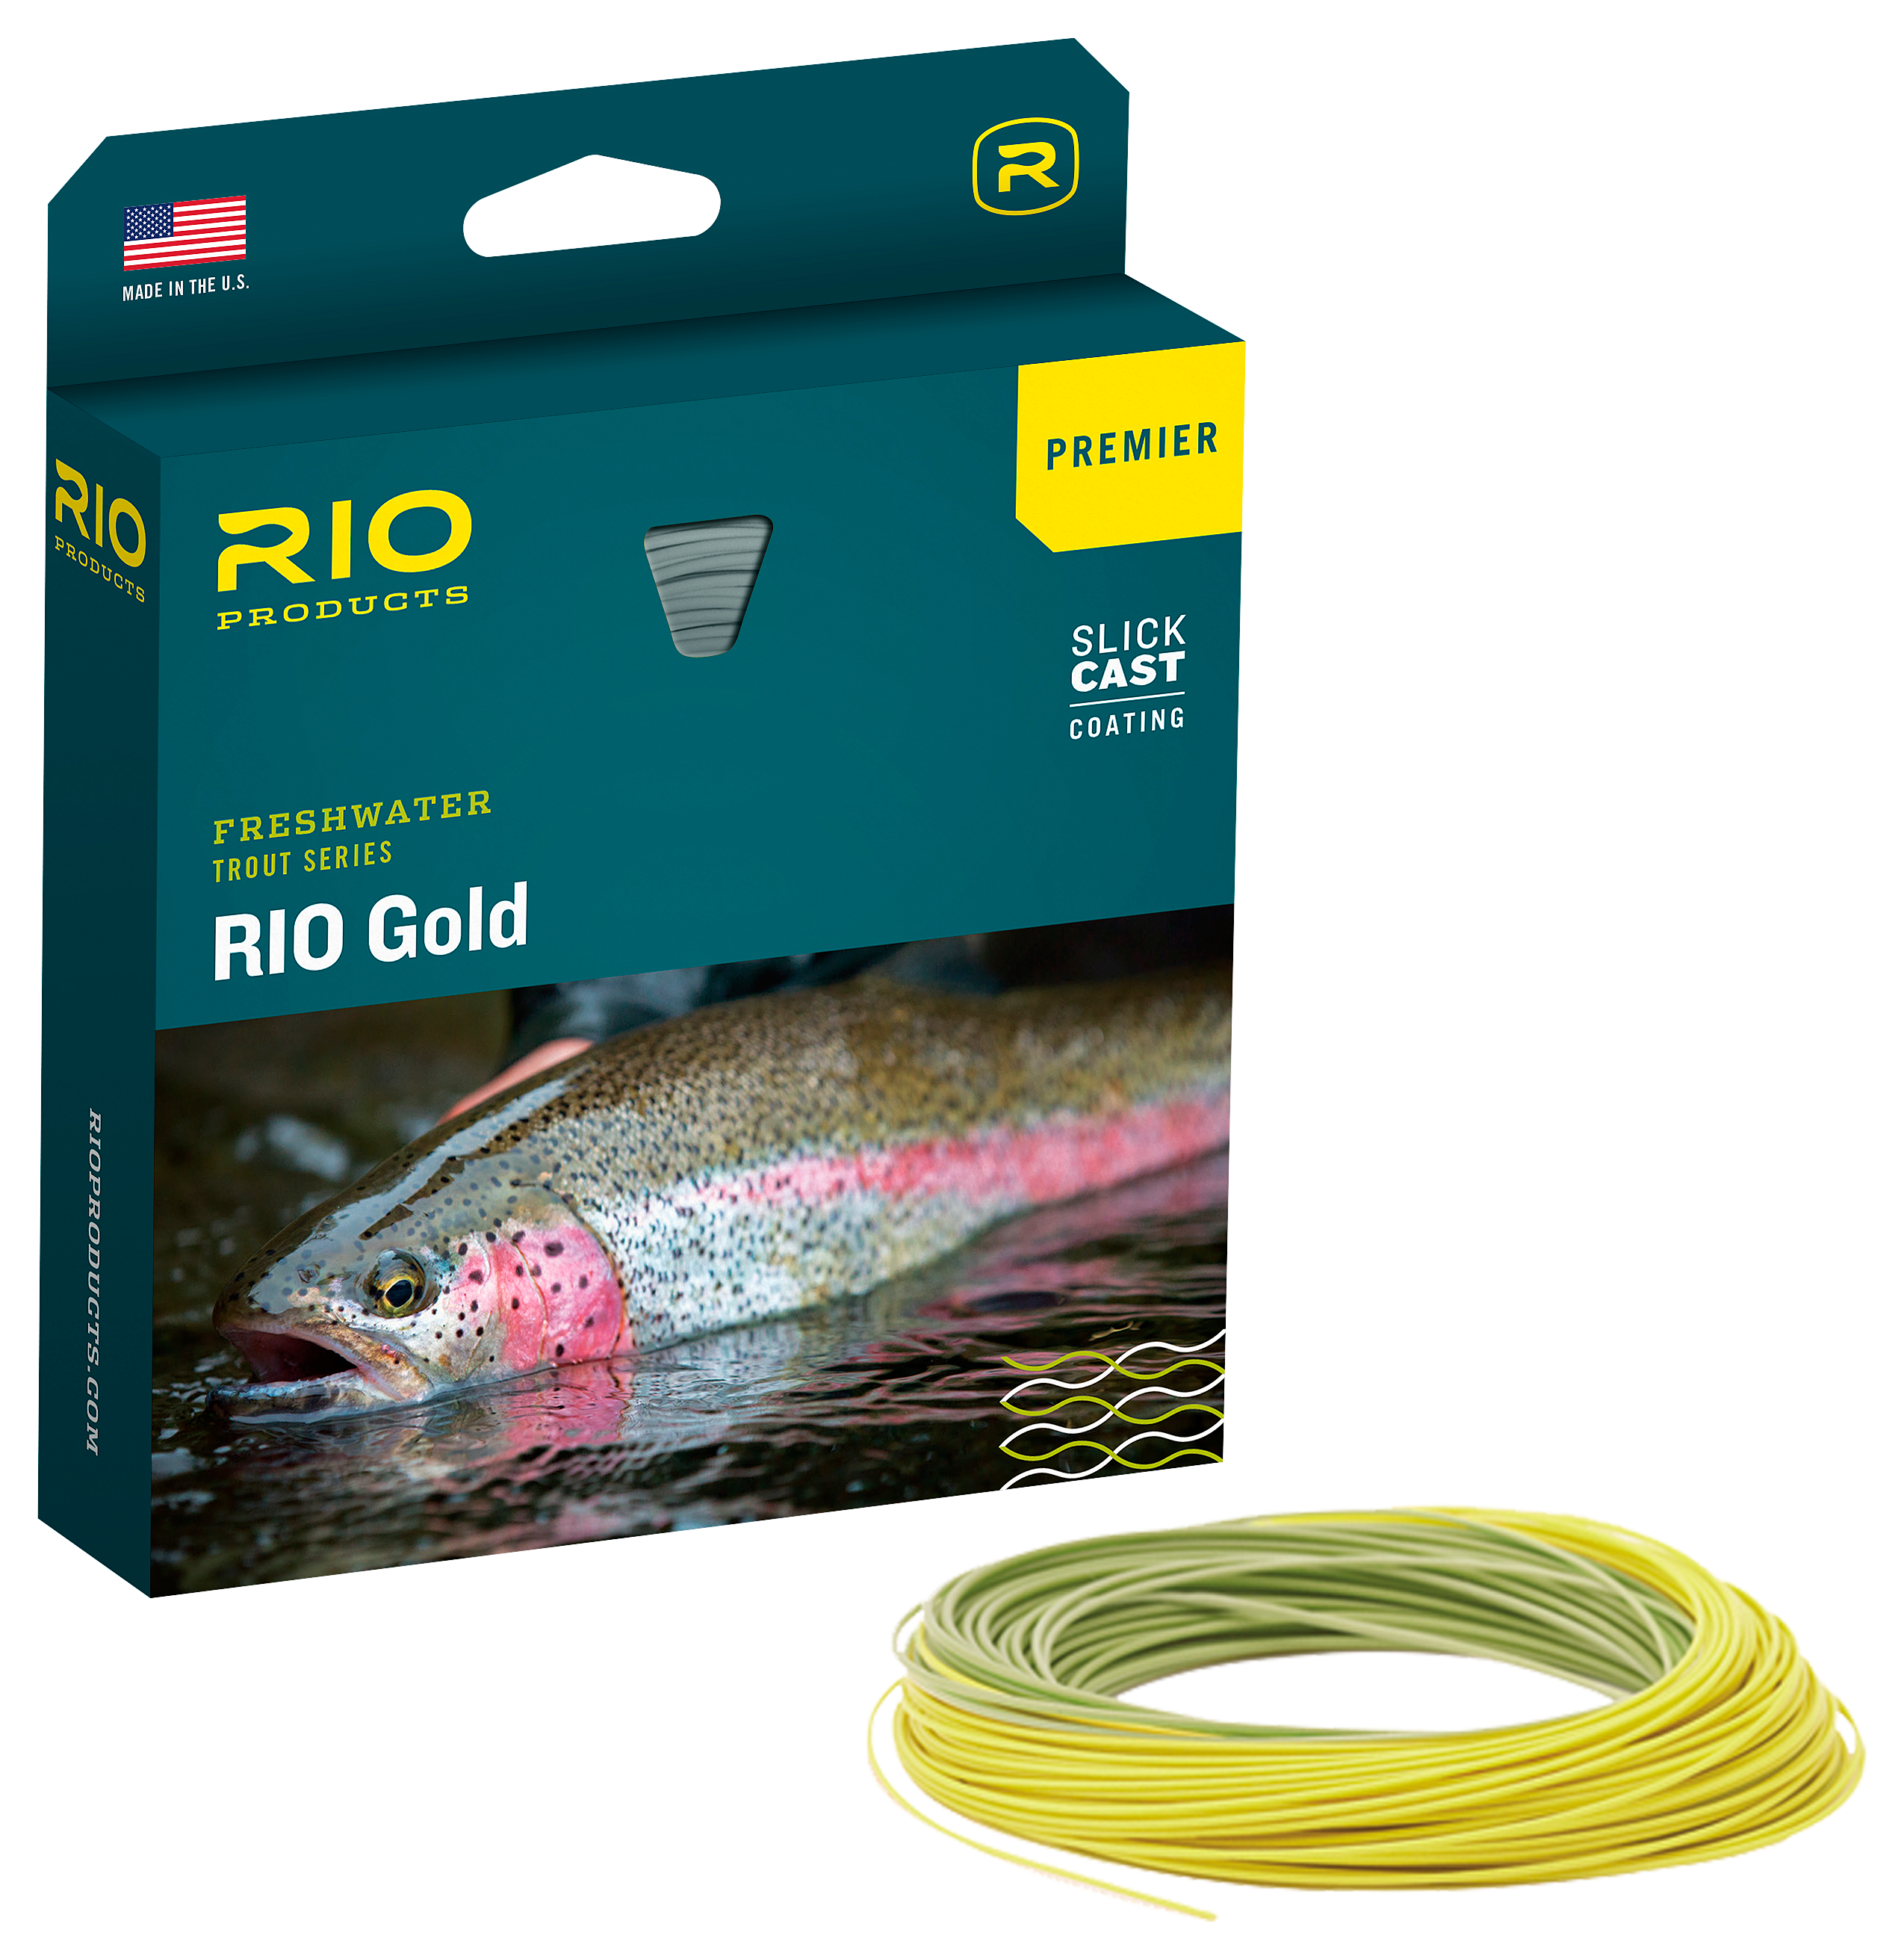 RIO Premier RIO Gold Fly Line - Moss/Gold - 90' - 9 Wt.